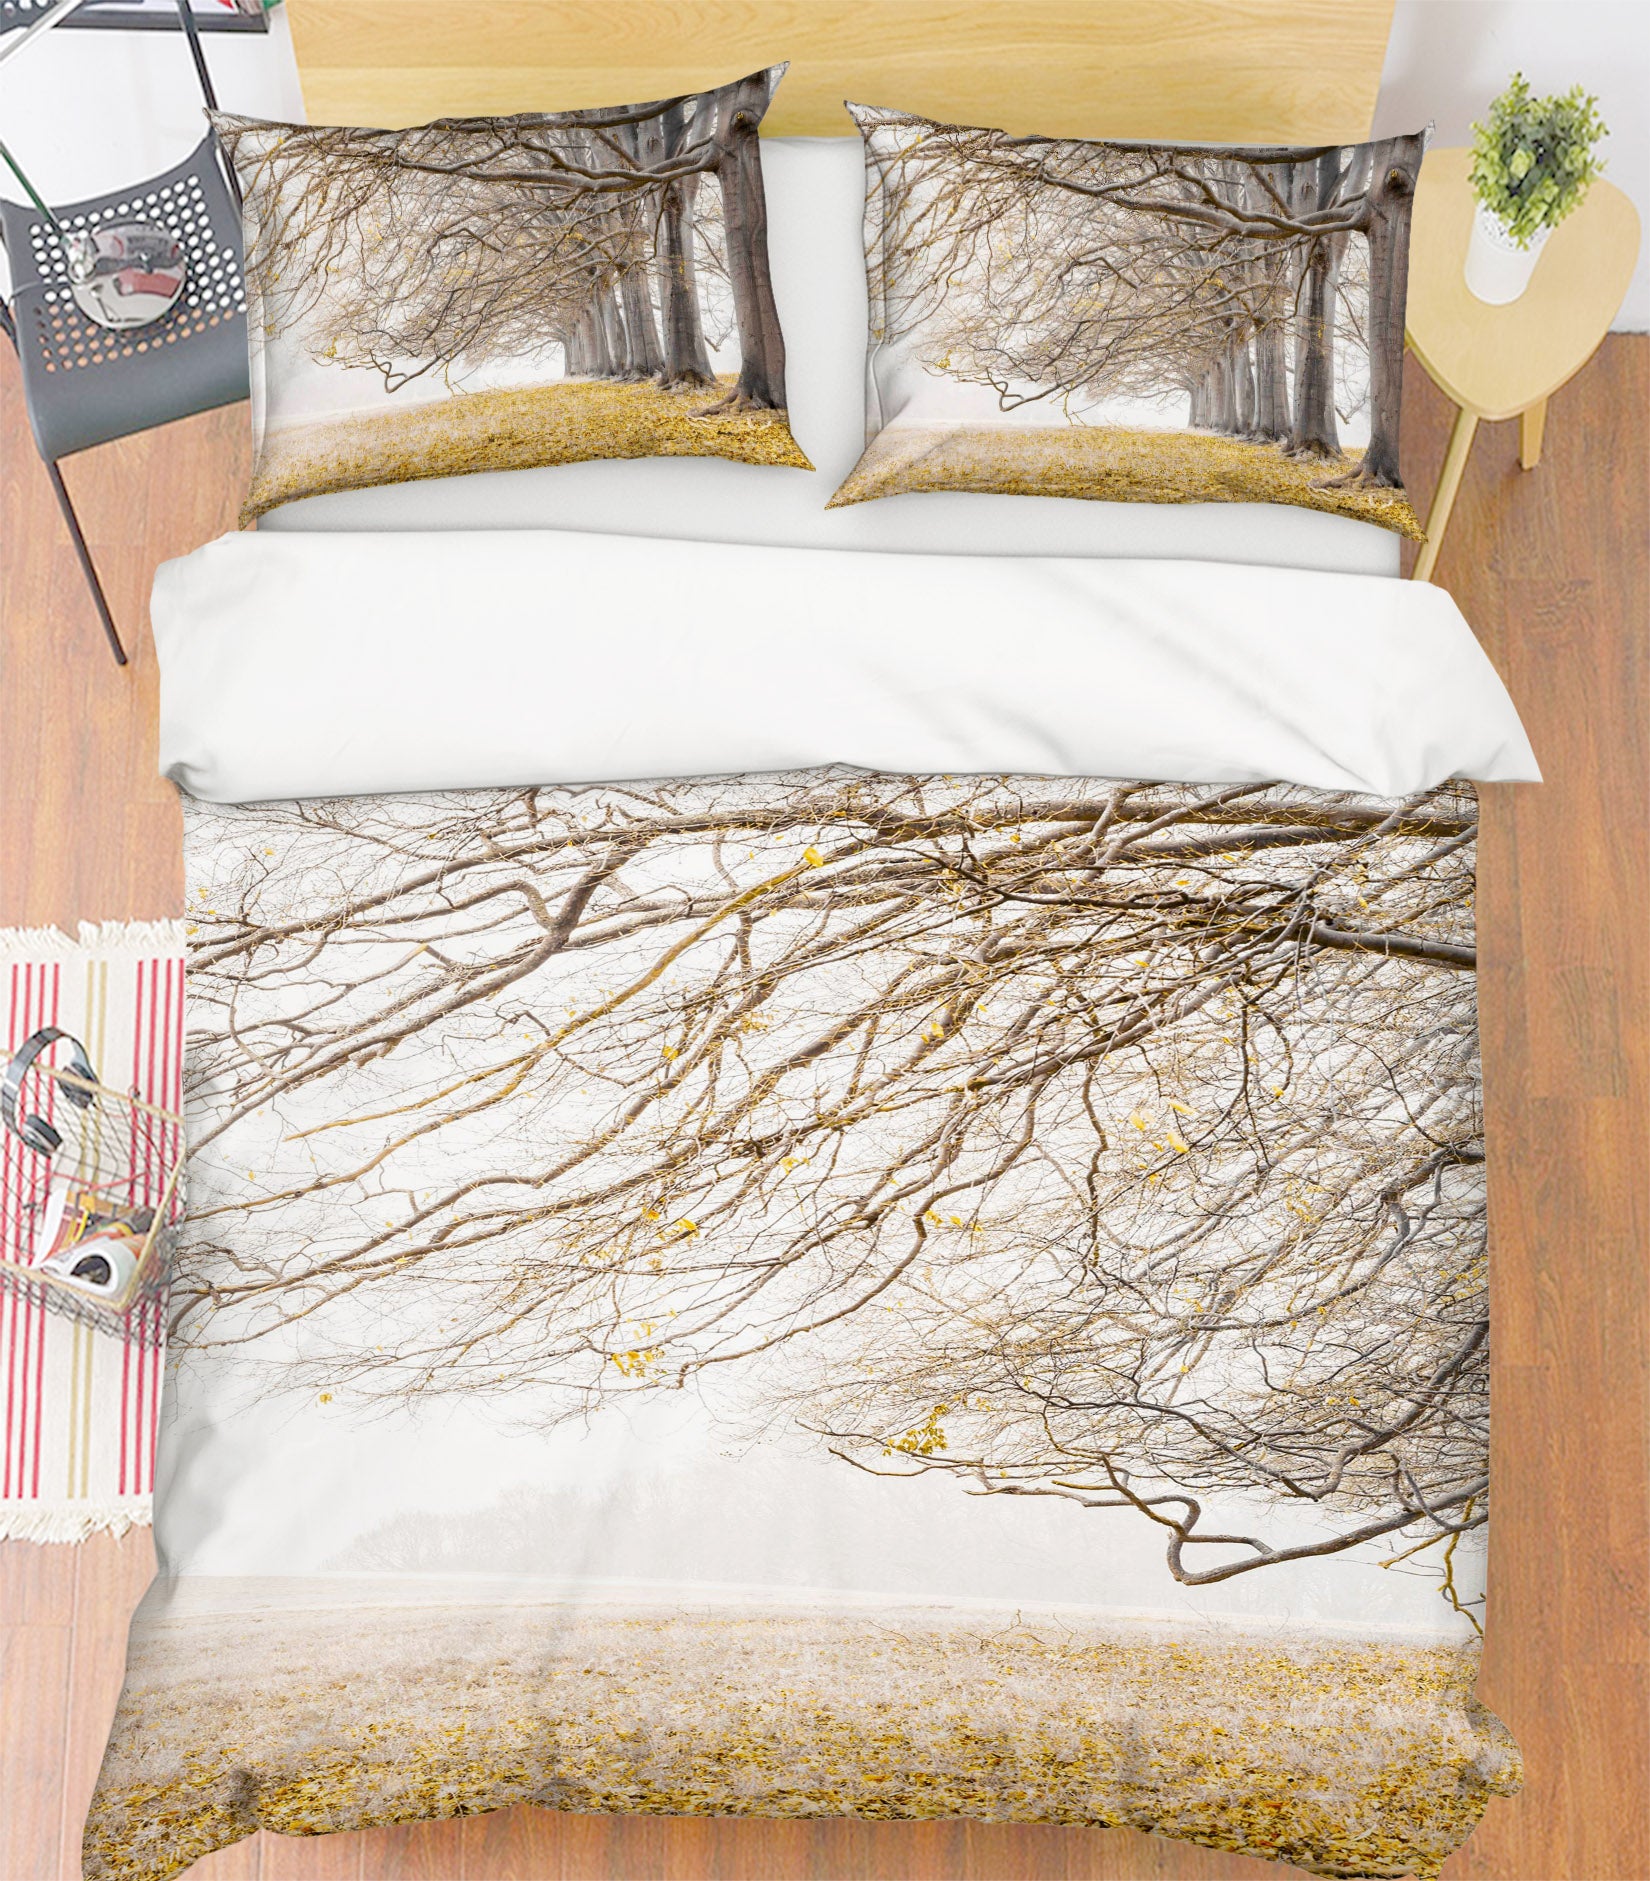 3D Tree Branches 7236 Assaf Frank Bedding Bed Pillowcases Quilt Cover Duvet Cover